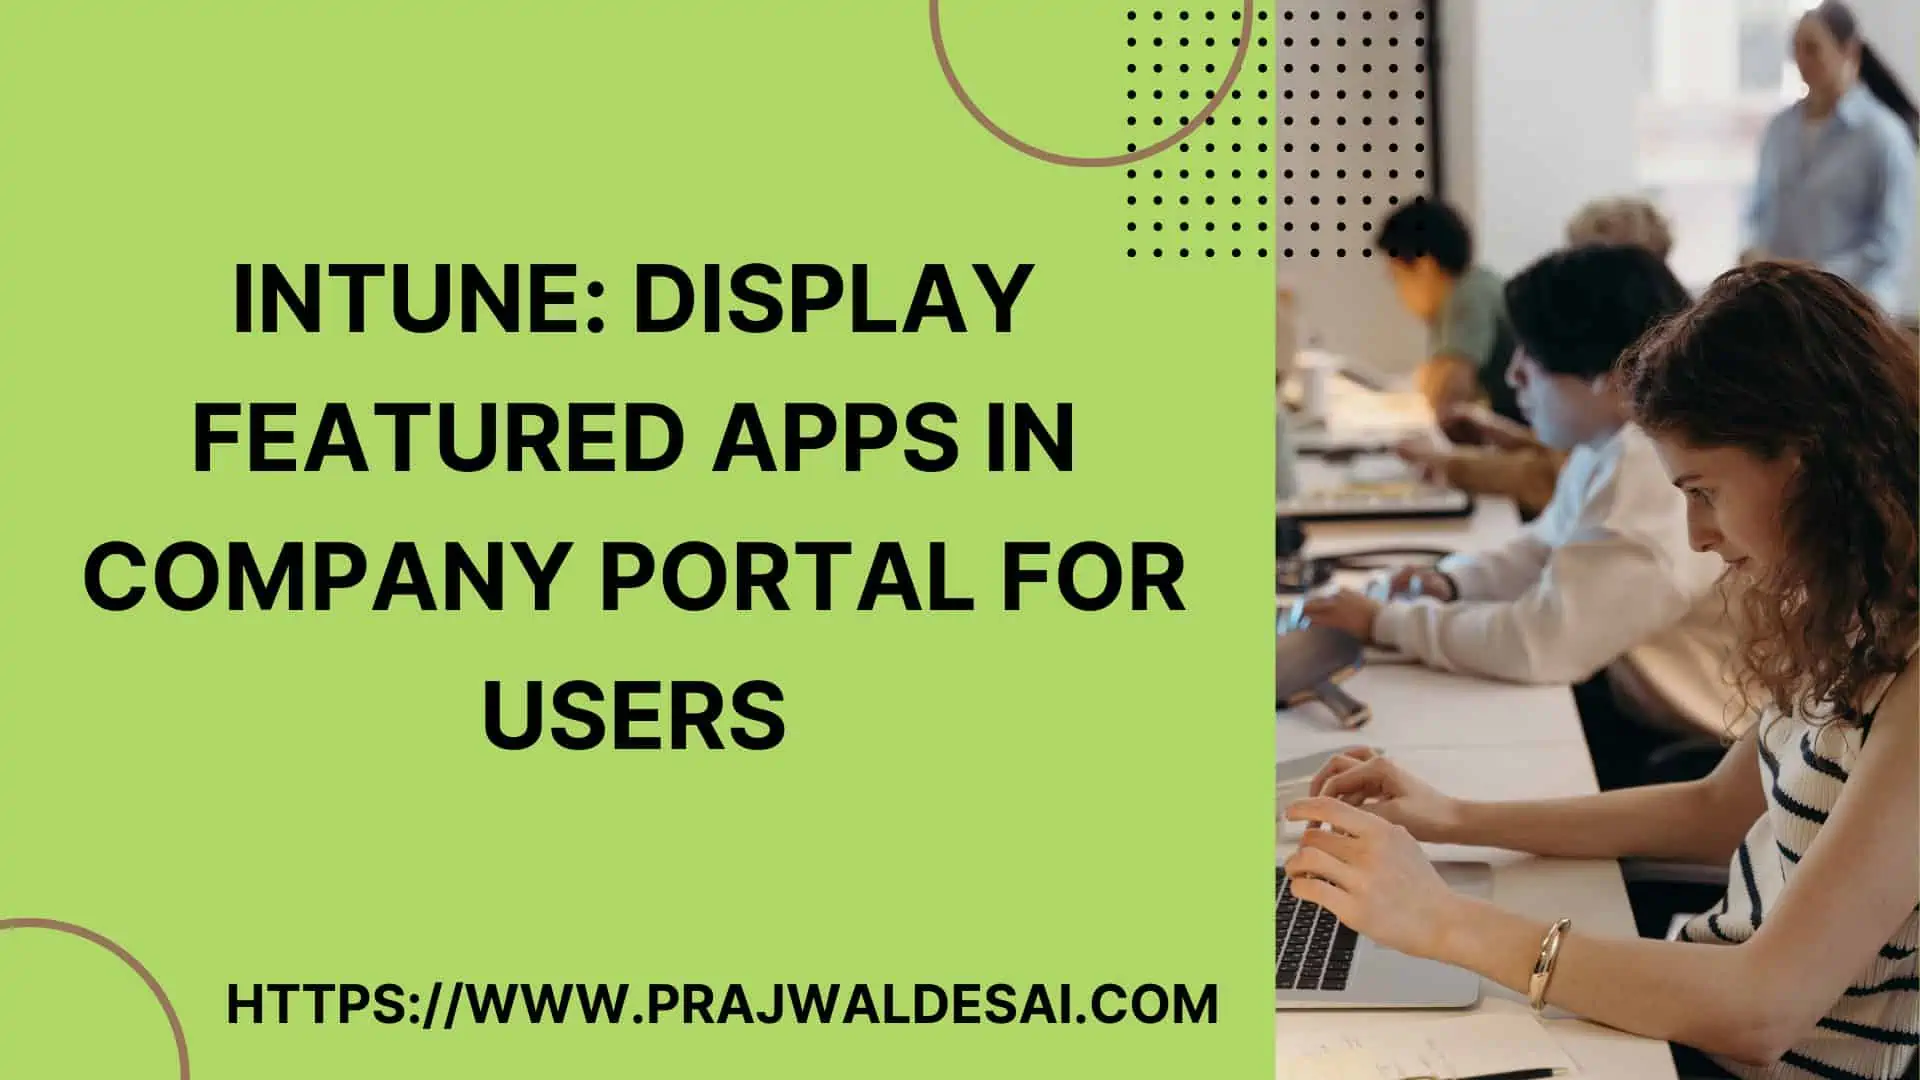 Intune Display Featured Apps in Company Portal for Users